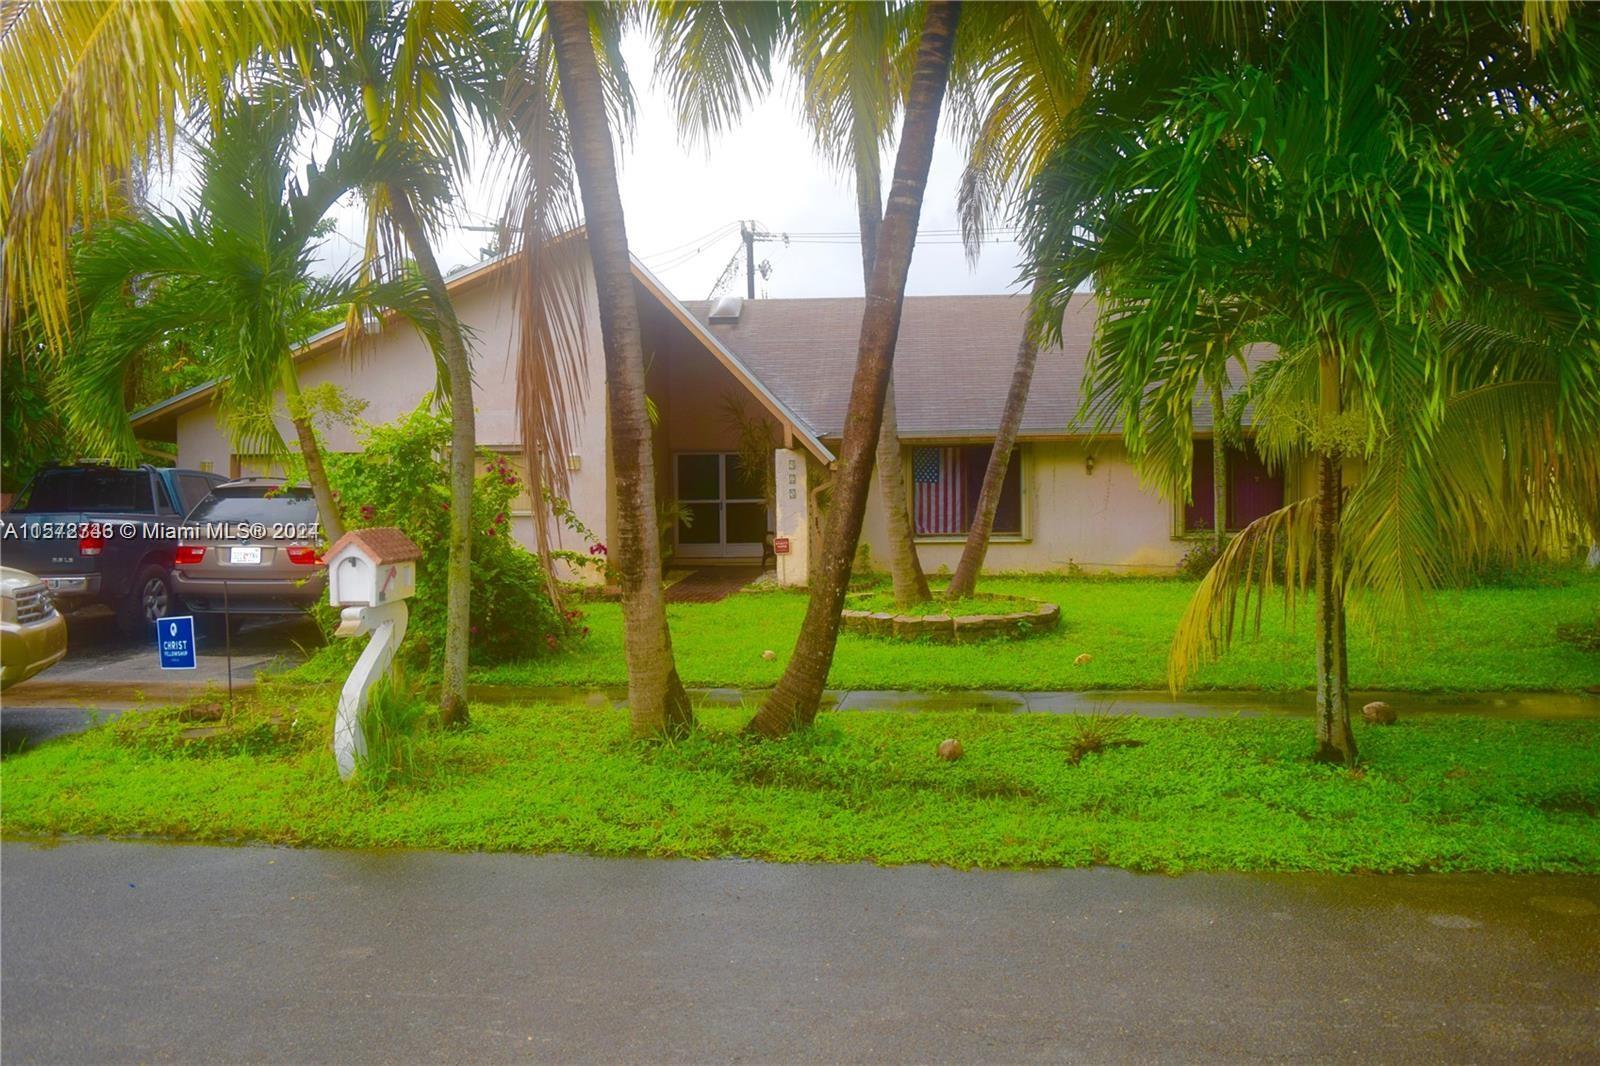 a view of a house with a yard and palm trees